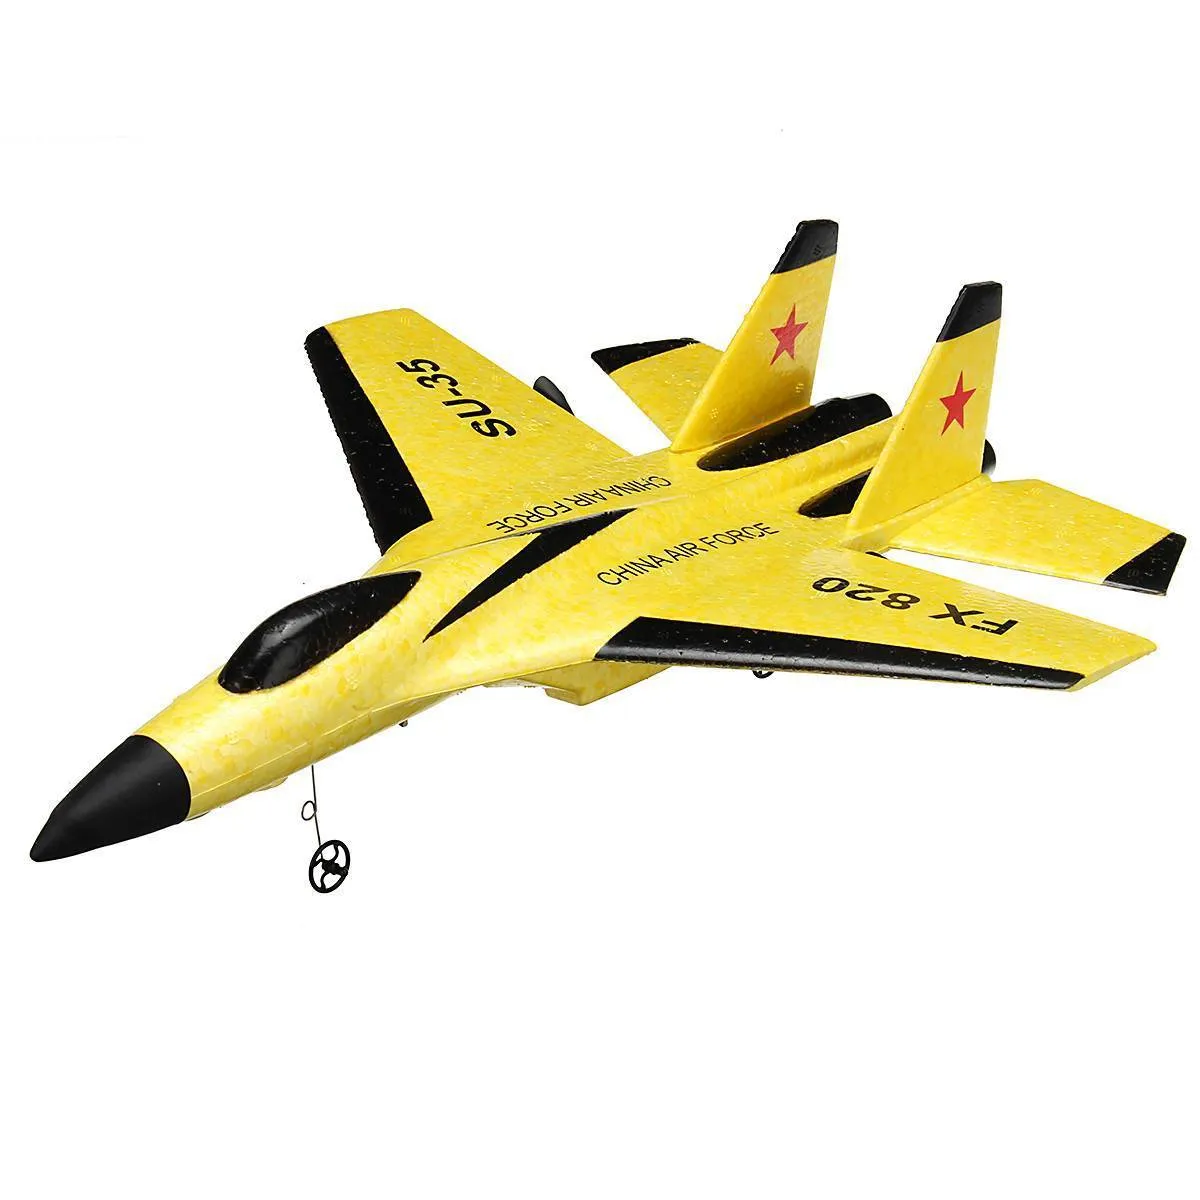 RC Plane Toy EPP Craft Foam Electric Outdoor RTF Radio Remote Control SU35 Tail Pusher Quadcopter Glider Airplane Model for Boy Y6572312